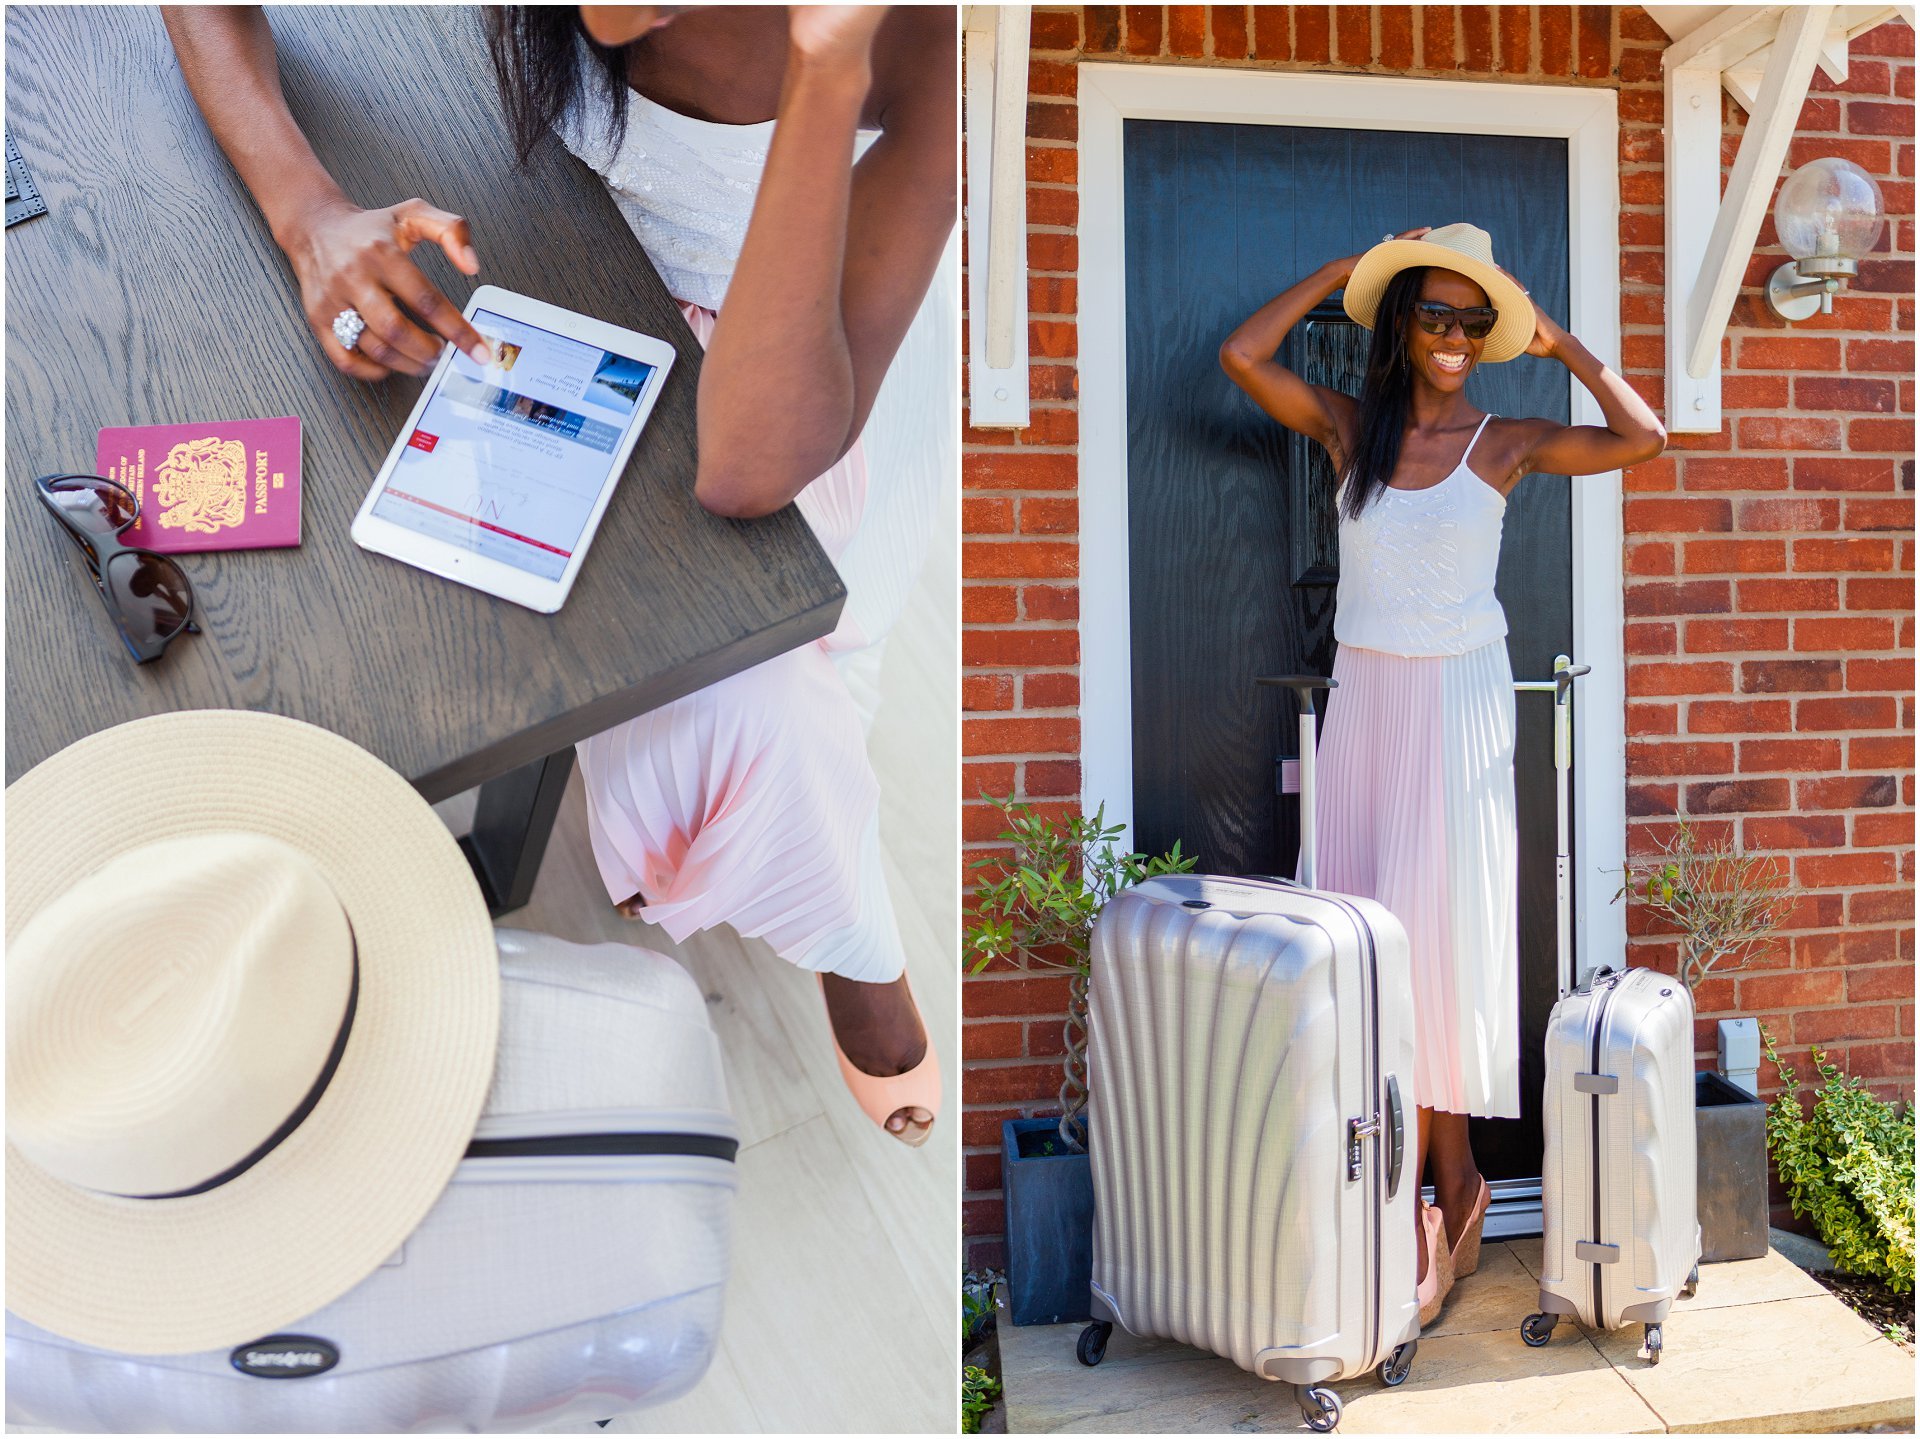 Leaving for holiday with Samsonite luggage - london product photography - AKP Branding Stories